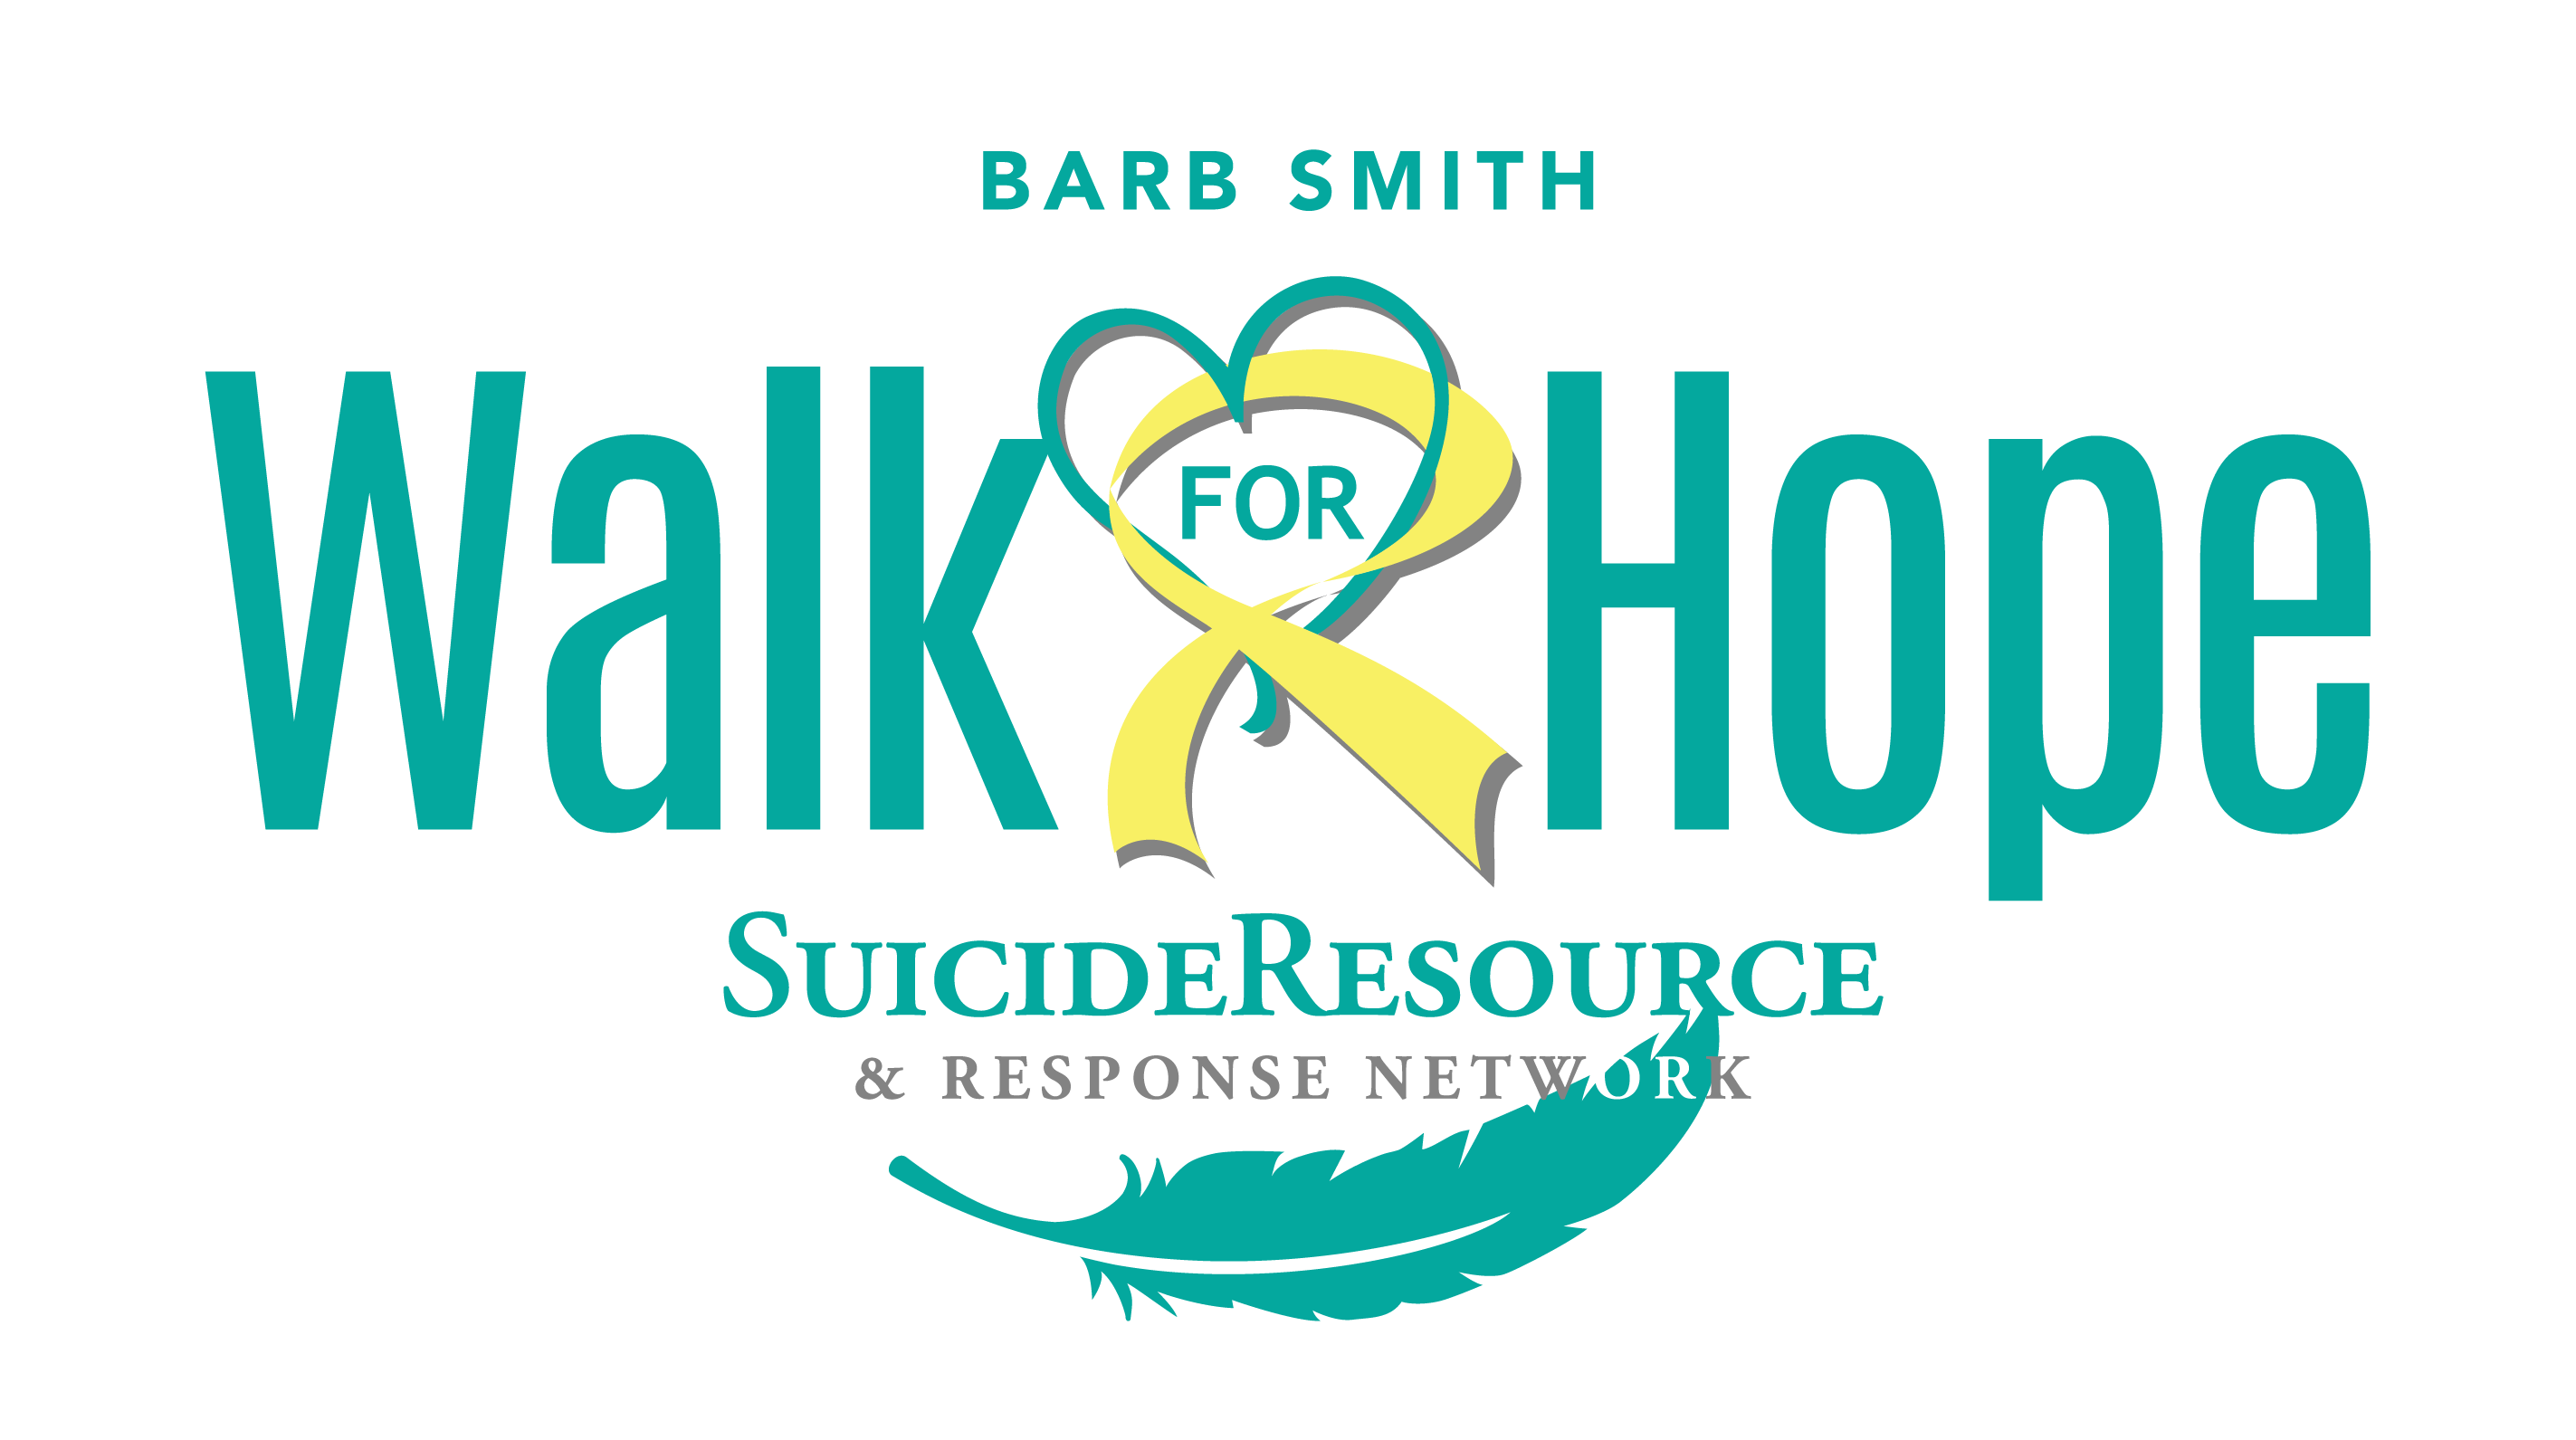 Walk For Hope 2021 Suicide Resource and Response